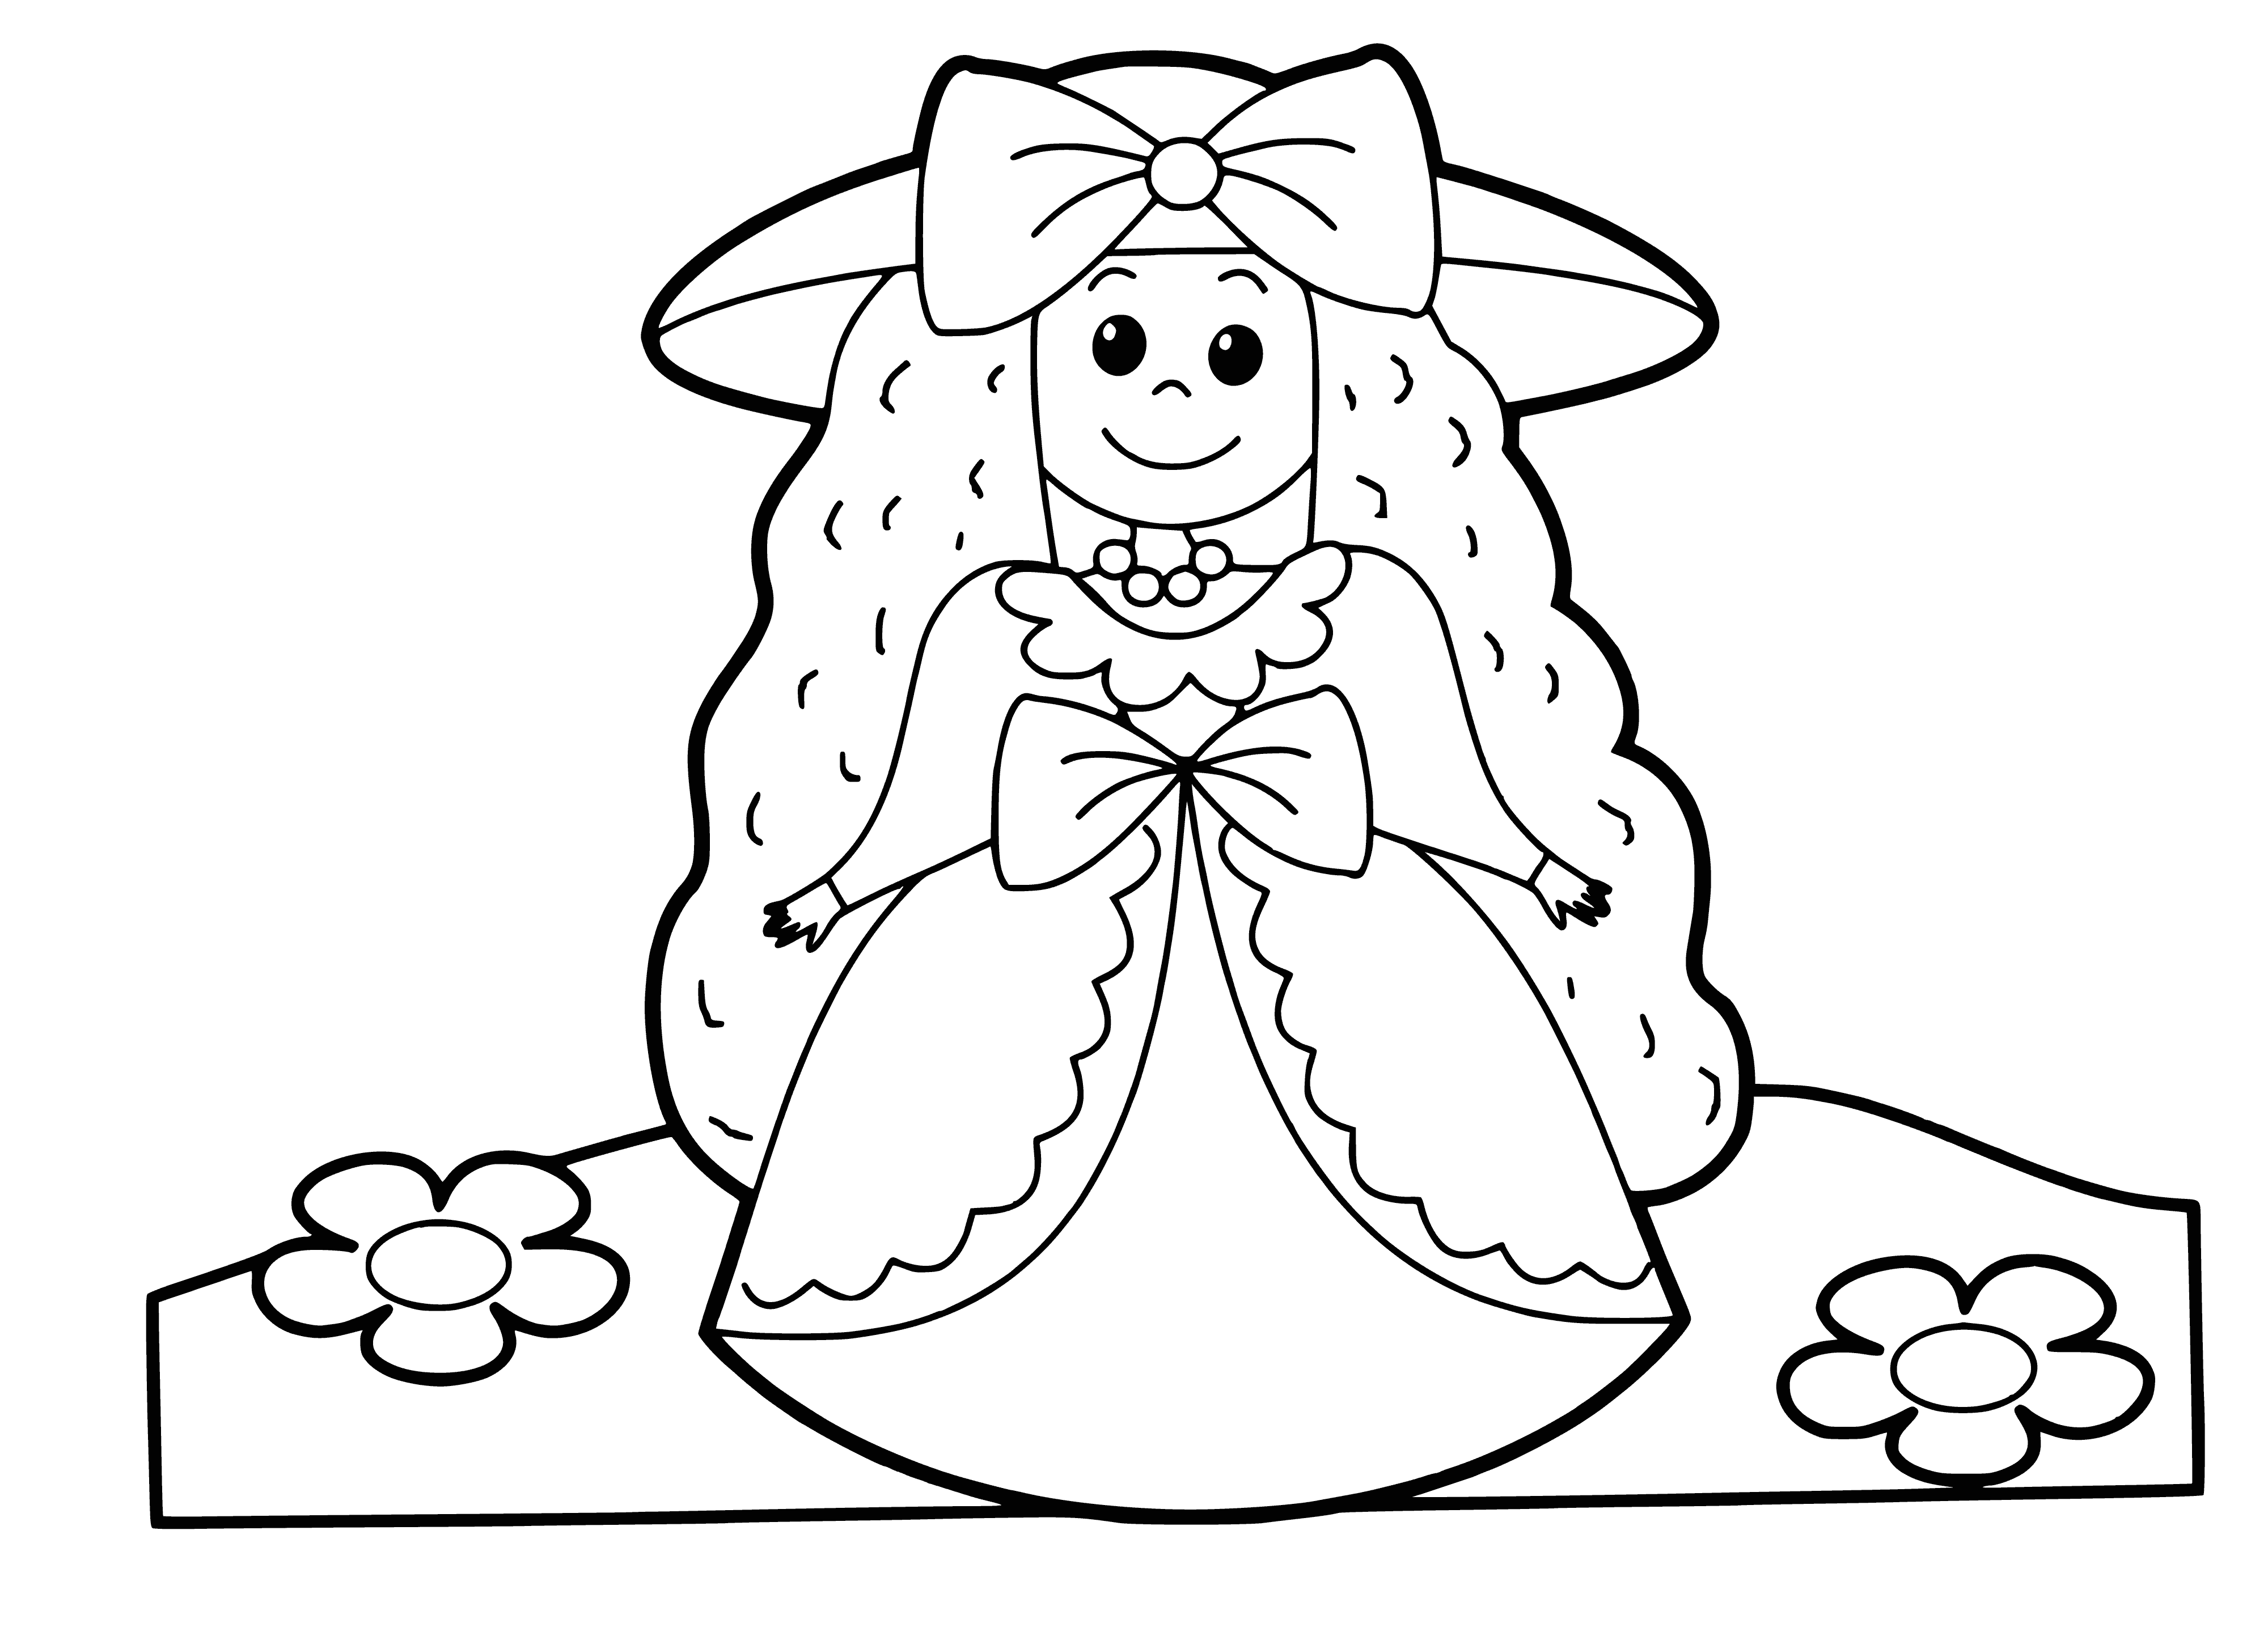 Girl in a hat coloring page